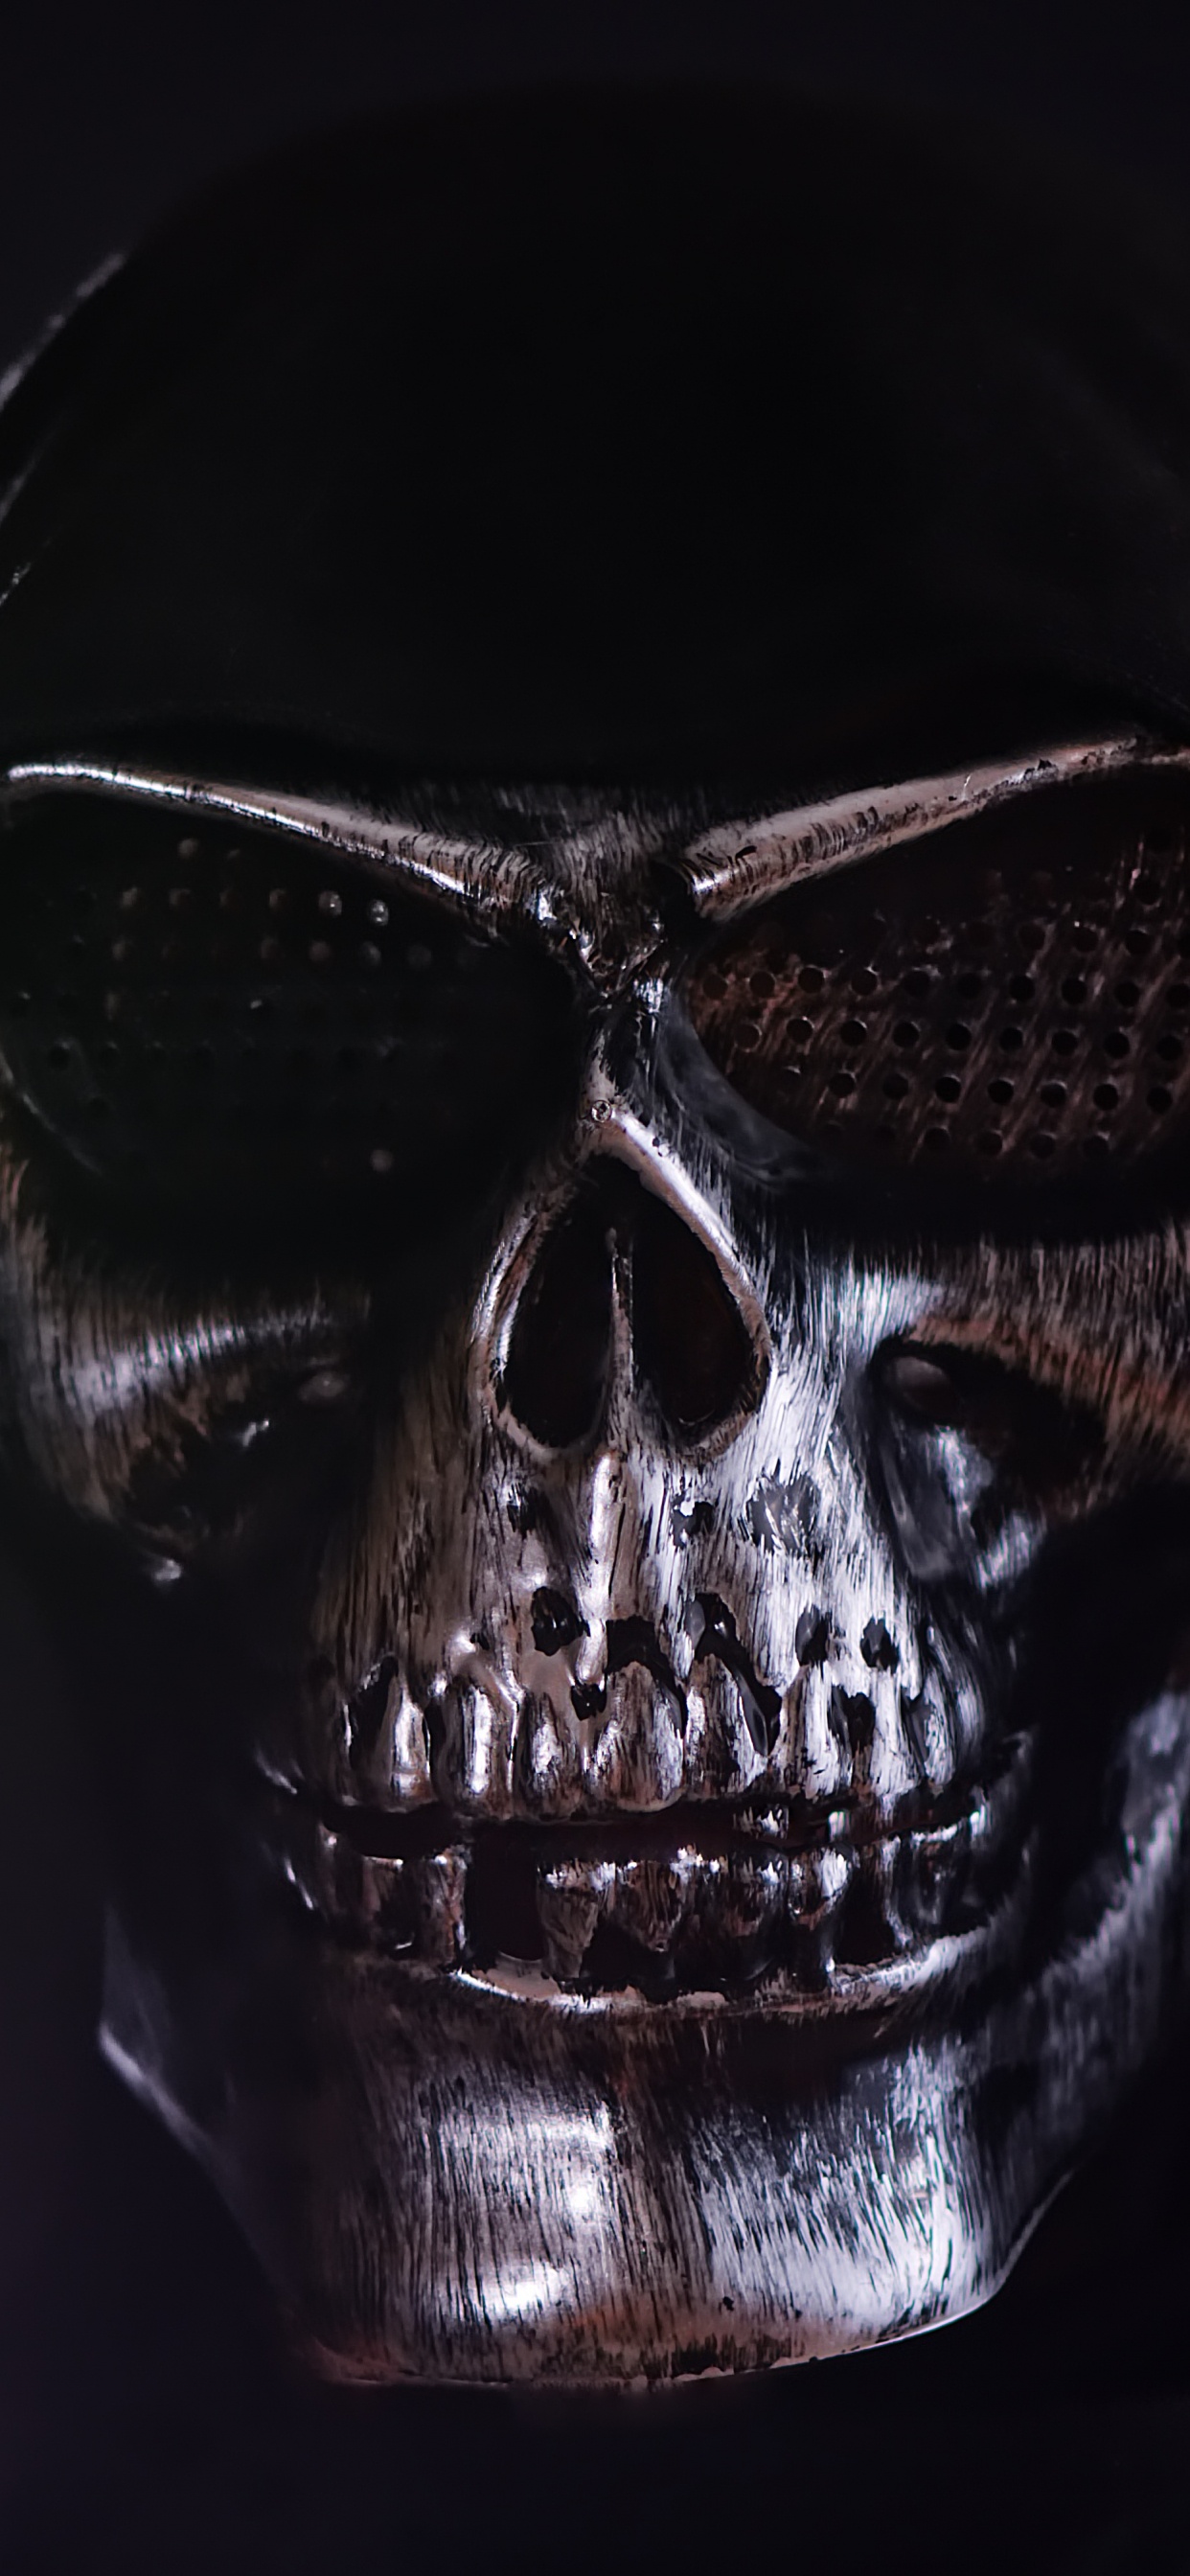 Black and Silver Skull Mask. Wallpaper in 1242x2688 Resolution